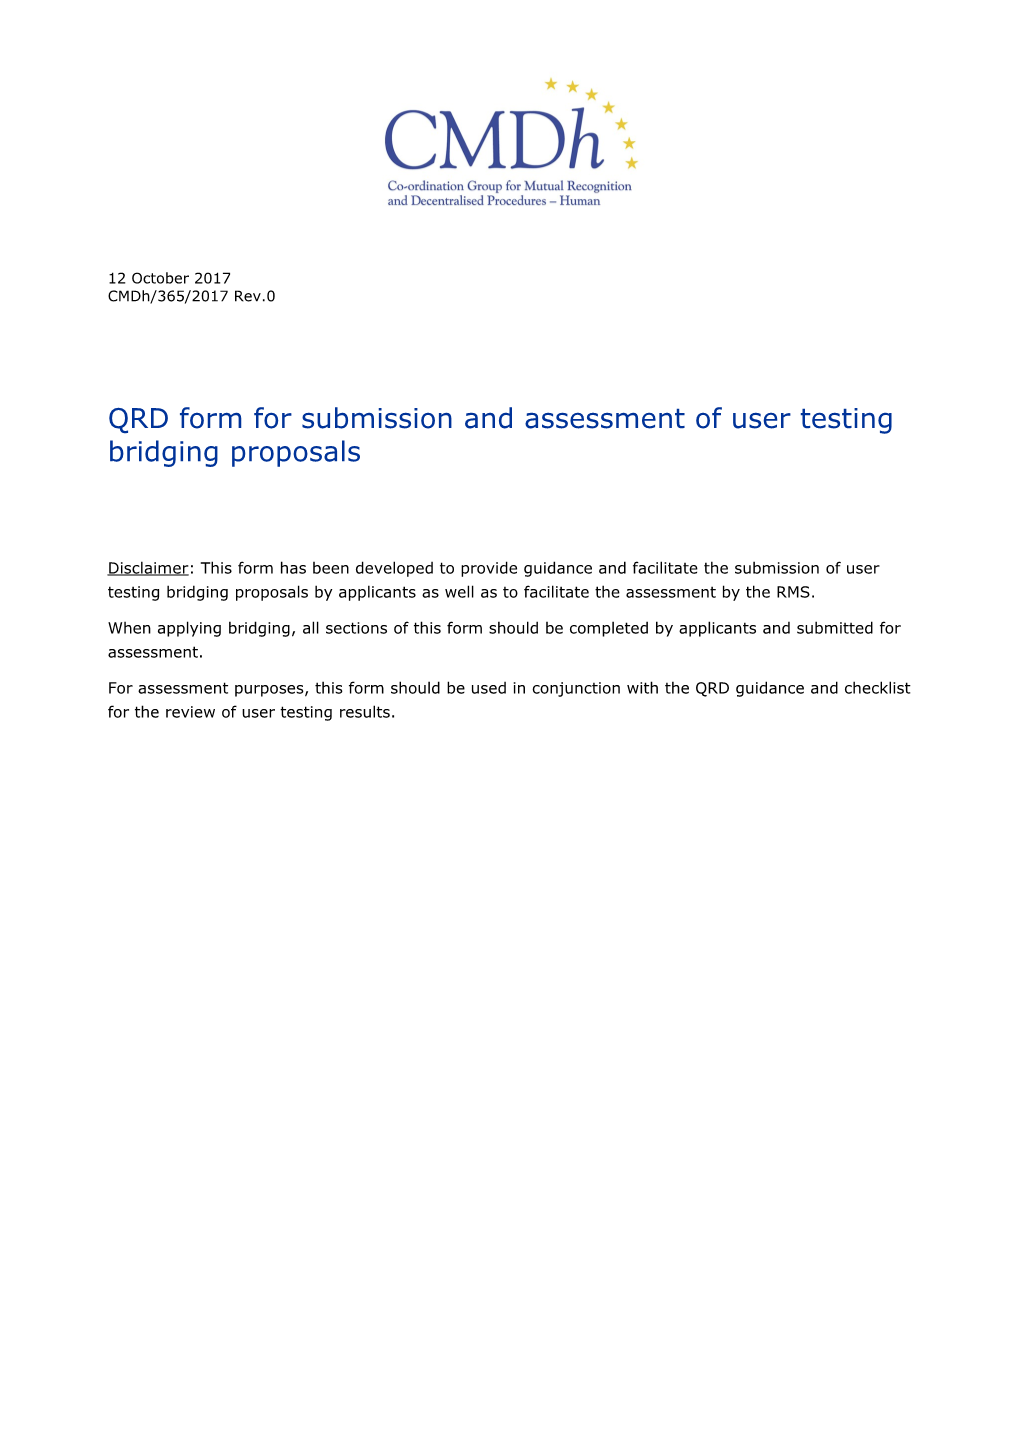 QRD Form for Submission and Assessment of User Testing Bridging Proposals